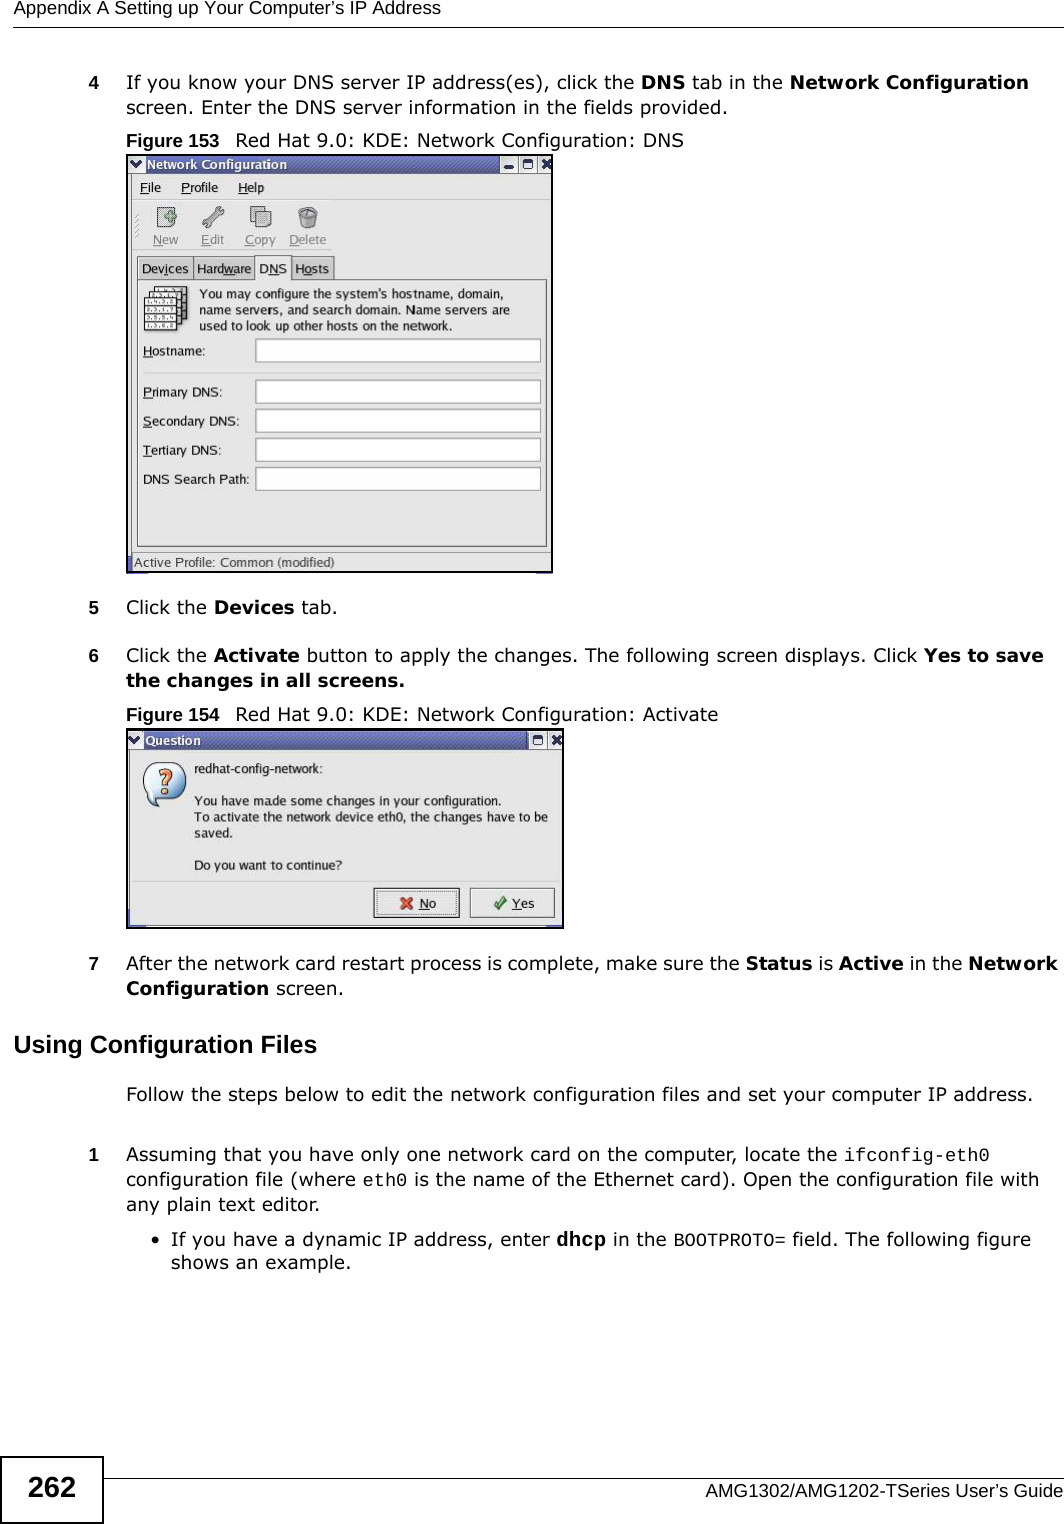 Appendix A Setting up Your Computer’s IP AddressAMG1302/AMG1202-TSeries User’s Guide2624If you know your DNS server IP address(es), click the DNS tab in the Network Configuration screen. Enter the DNS server information in the fields provided. Figure 153   Red Hat 9.0: KDE: Network Configuration: DNS 5Click the Devices tab. 6Click the Activate button to apply the changes. The following screen displays. Click Yes to save the changes in all screens.Figure 154   Red Hat 9.0: KDE: Network Configuration: Activate  7After the network card restart process is complete, make sure the Status is Active in the Network Configuration screen.Using Configuration FilesFollow the steps below to edit the network configuration files and set your computer IP address. 1Assuming that you have only one network card on the computer, locate the ifconfig-eth0 configuration file (where eth0 is the name of the Ethernet card). Open the configuration file with any plain text editor.• If you have a dynamic IP address, enter dhcp in the BOOTPROTO= field. The following figure shows an example. 